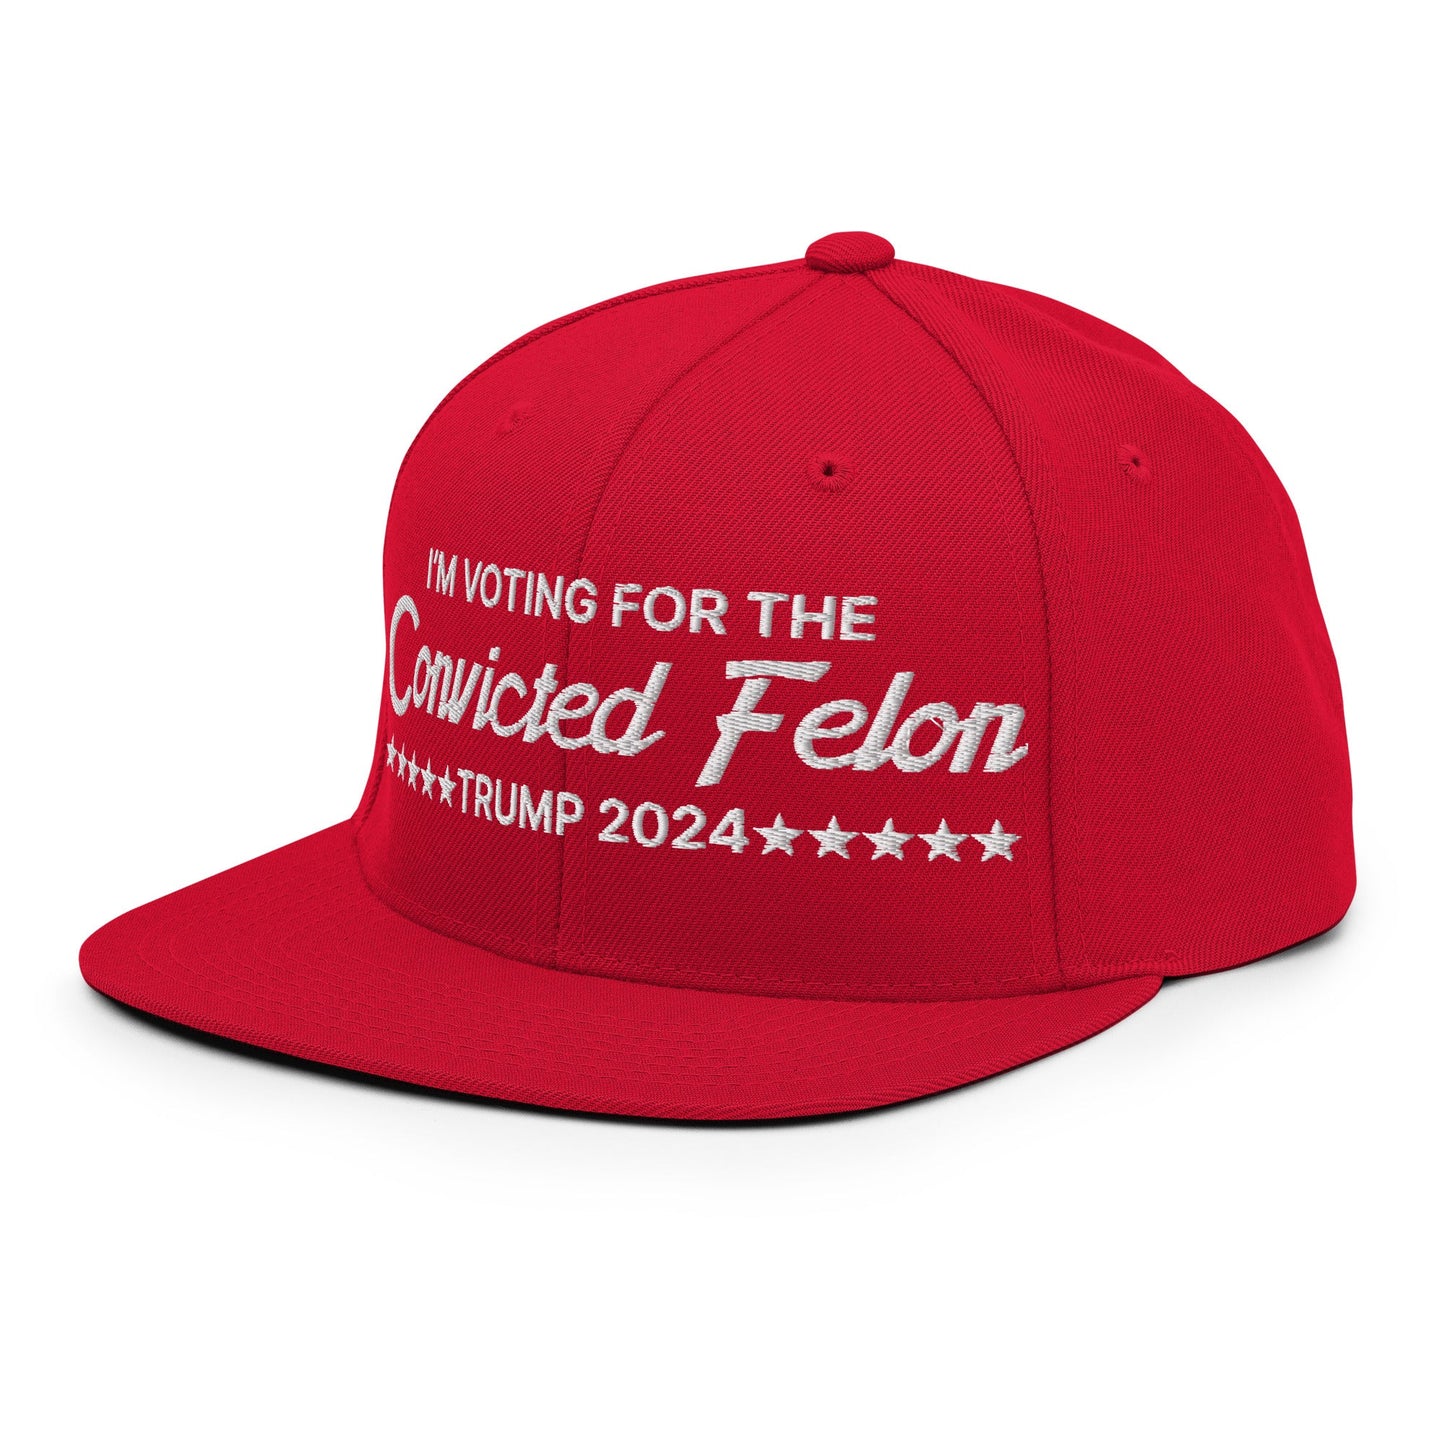 I'm Voting For The Convicted Felon Trump 2024 Snapback Hat Red